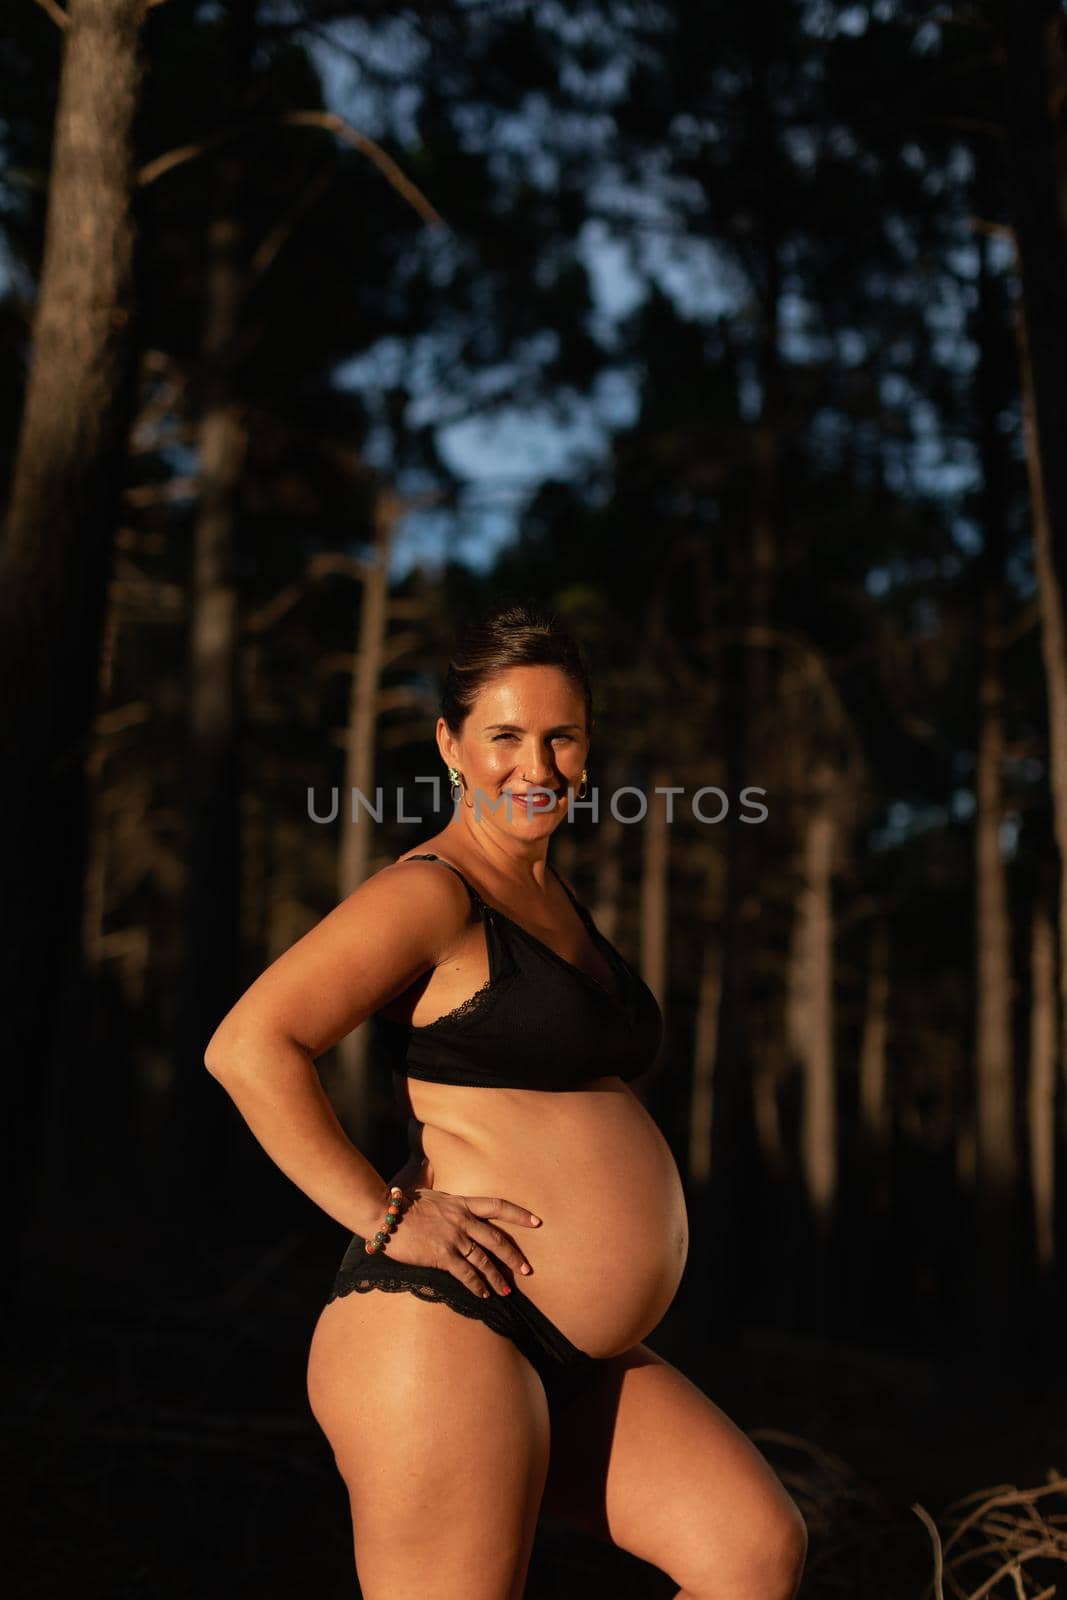 A pregnant woman caresses her belly and smiles at camera wearing black underwear by stockrojoverdeyazul